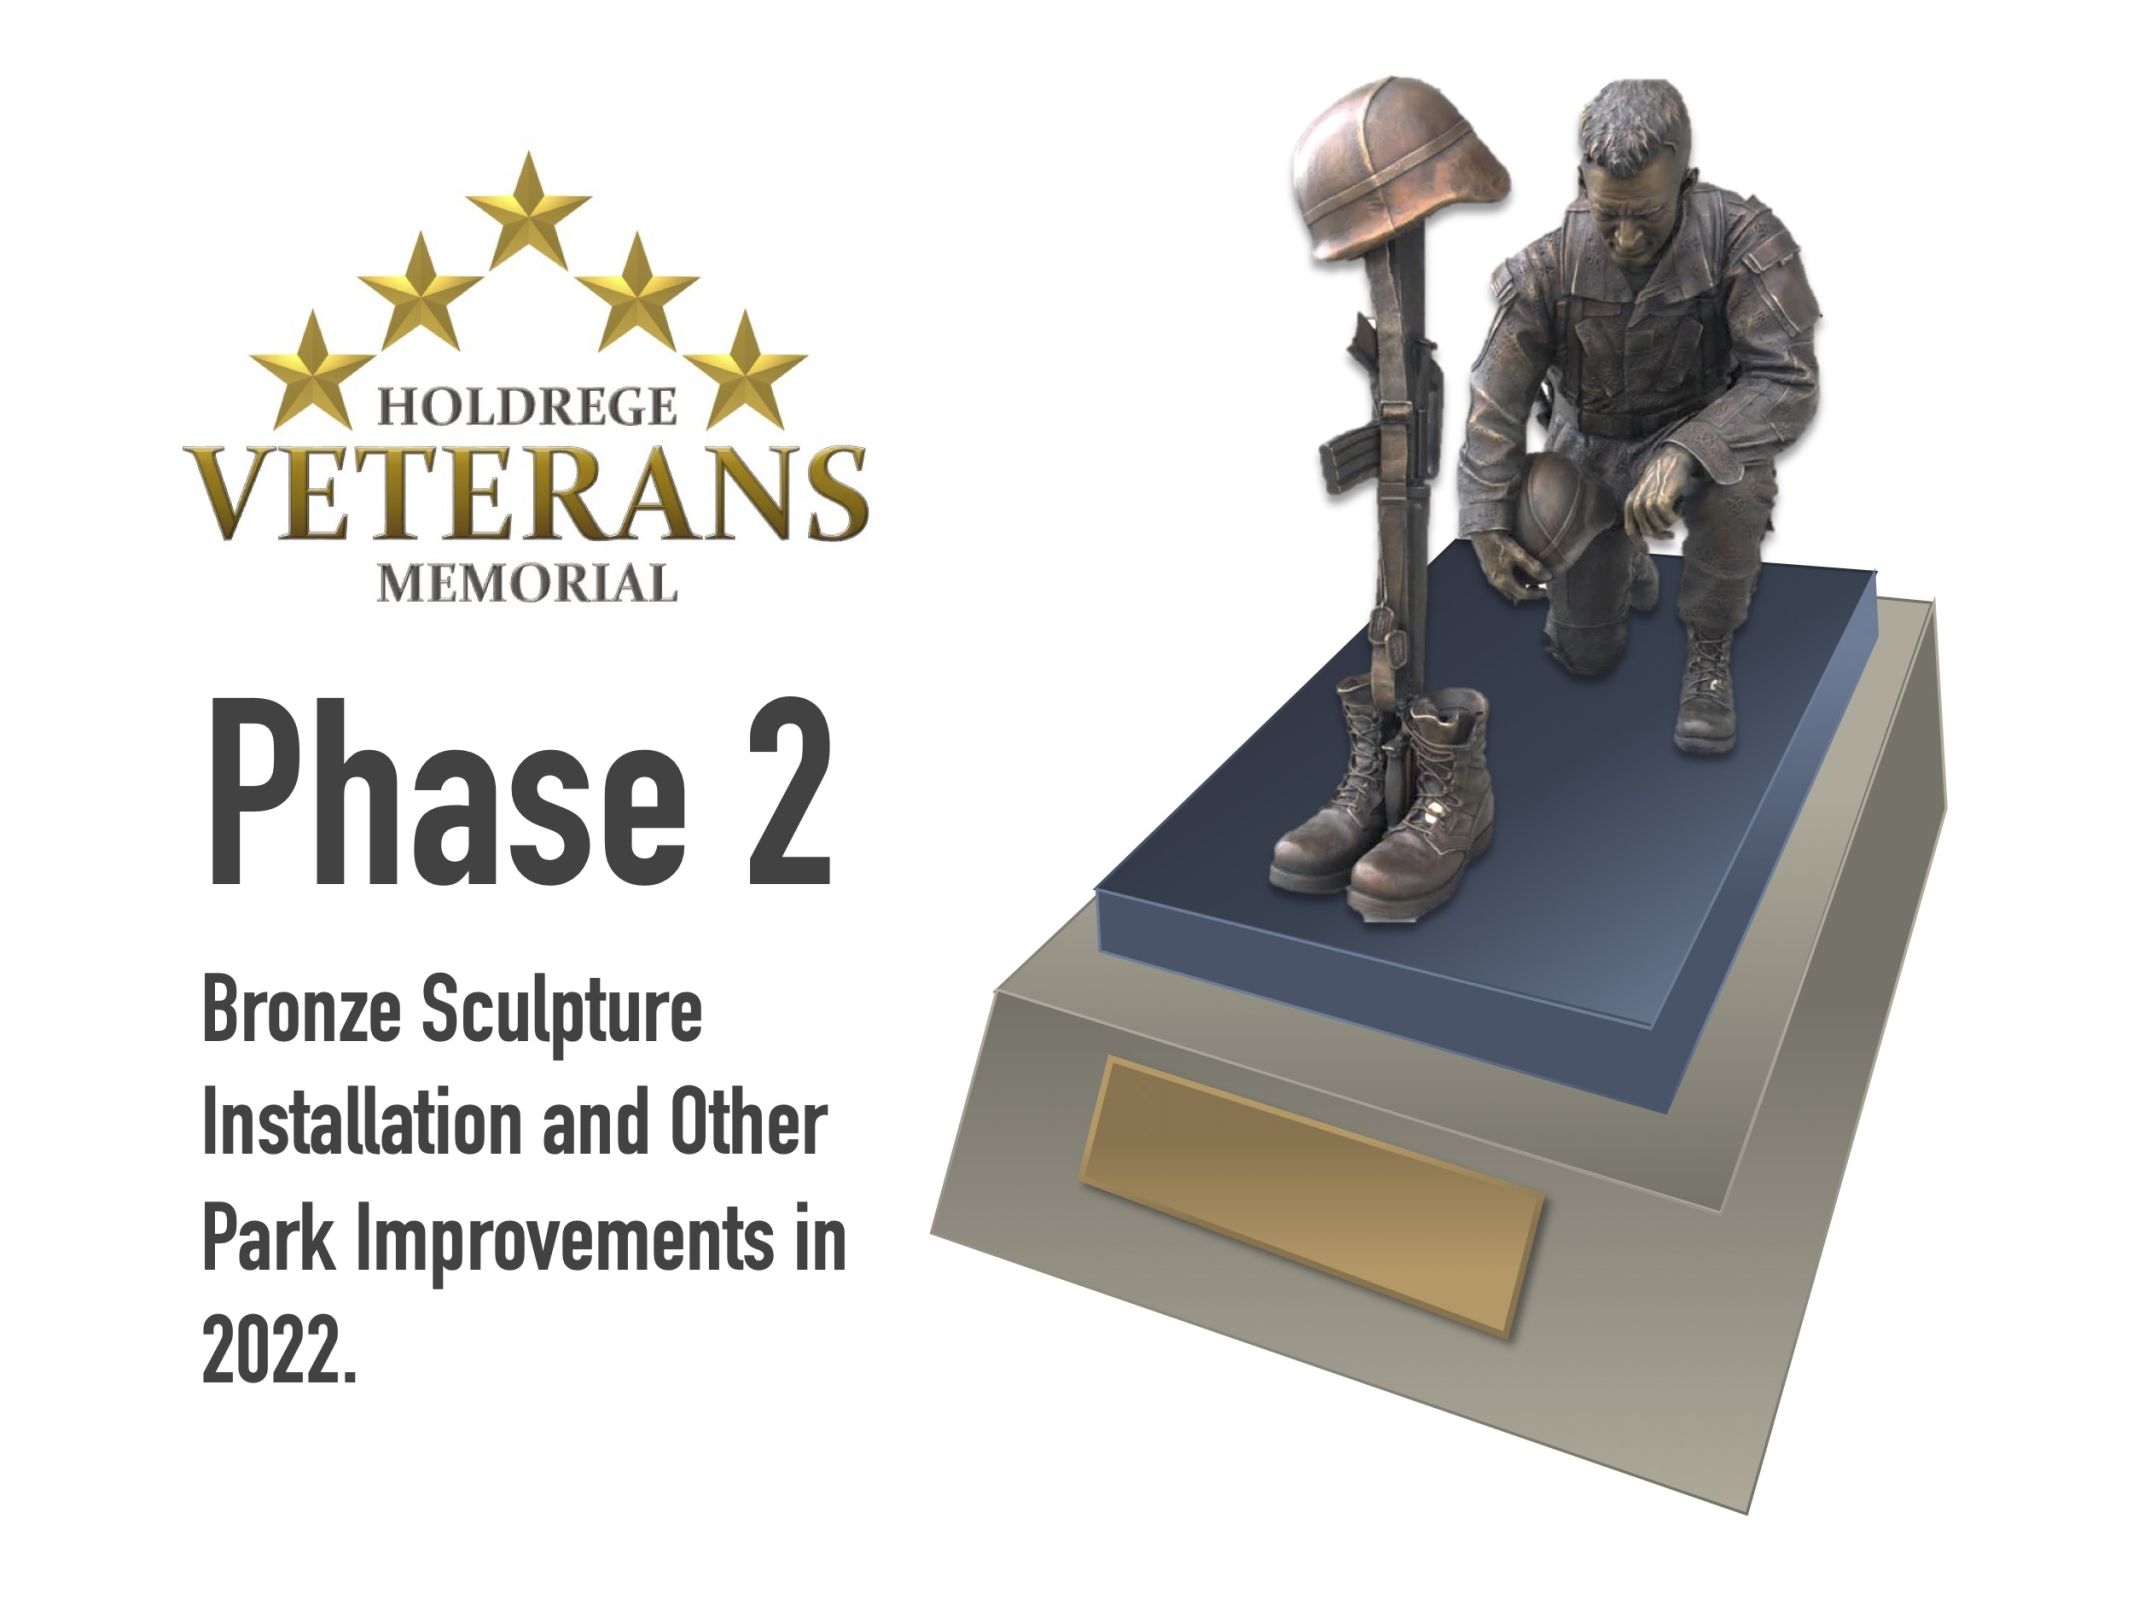 Sculpture Dedication Ceremony Planned for Veterans Day Photo